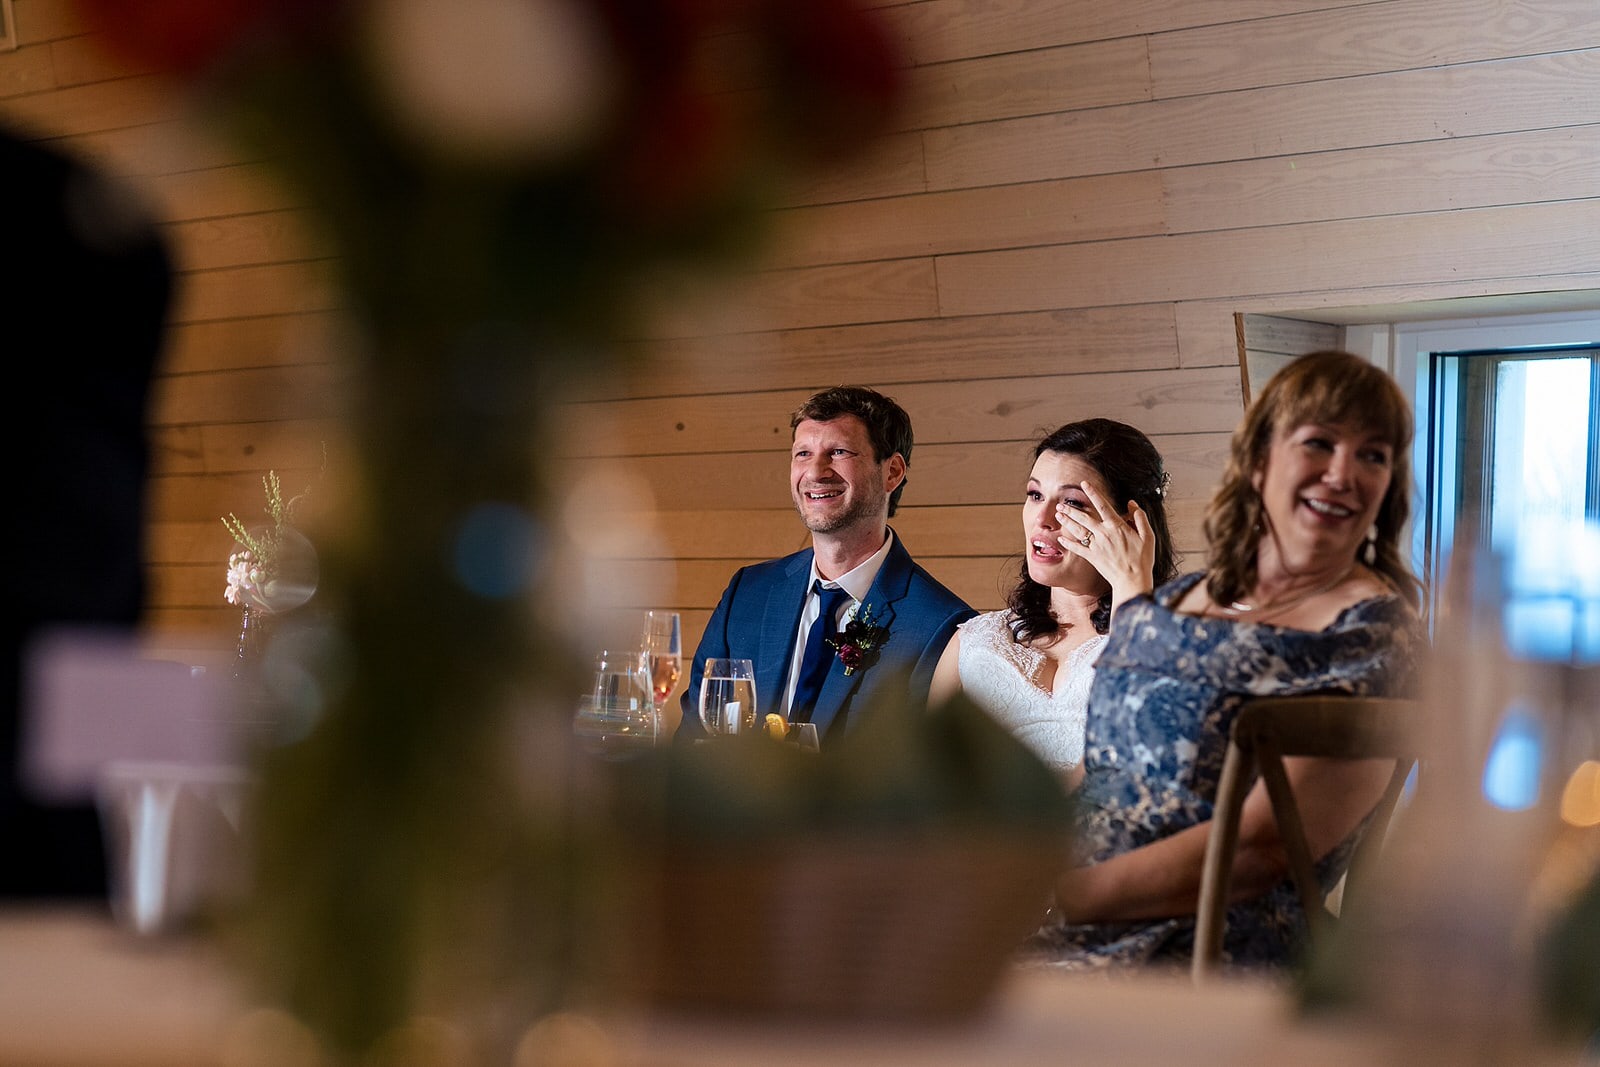 Wedding toasts should make you laugh & cry